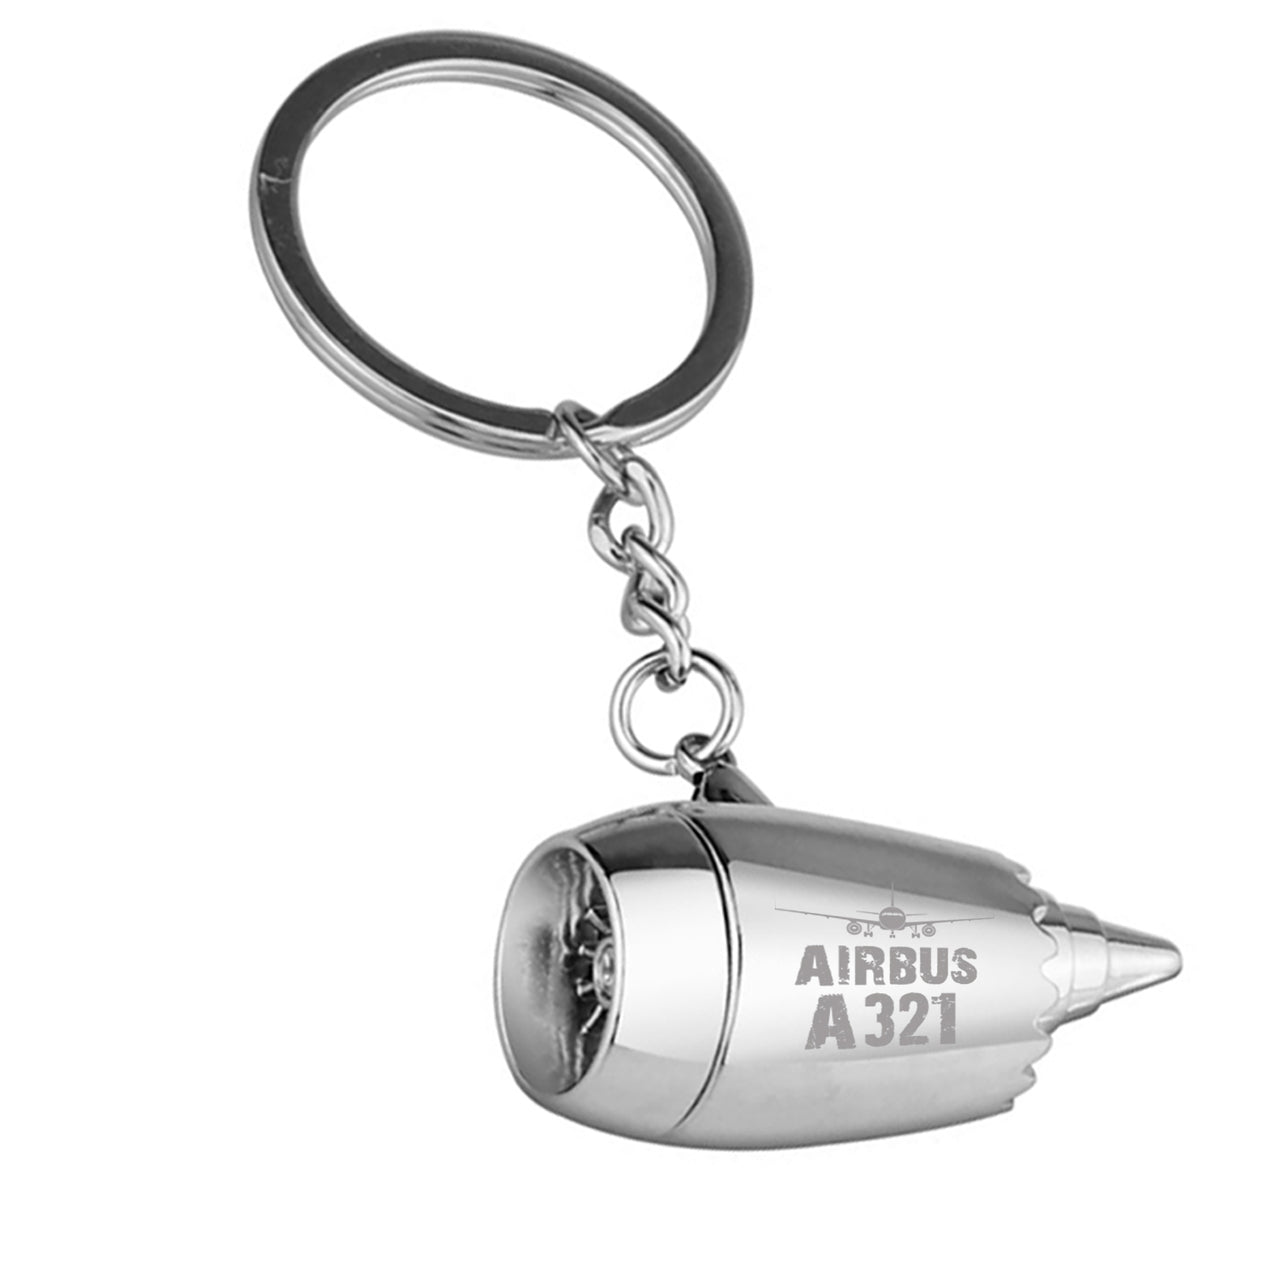 Airbus A321 & Plane Designed Airplane Jet Engine Shaped Key Chain